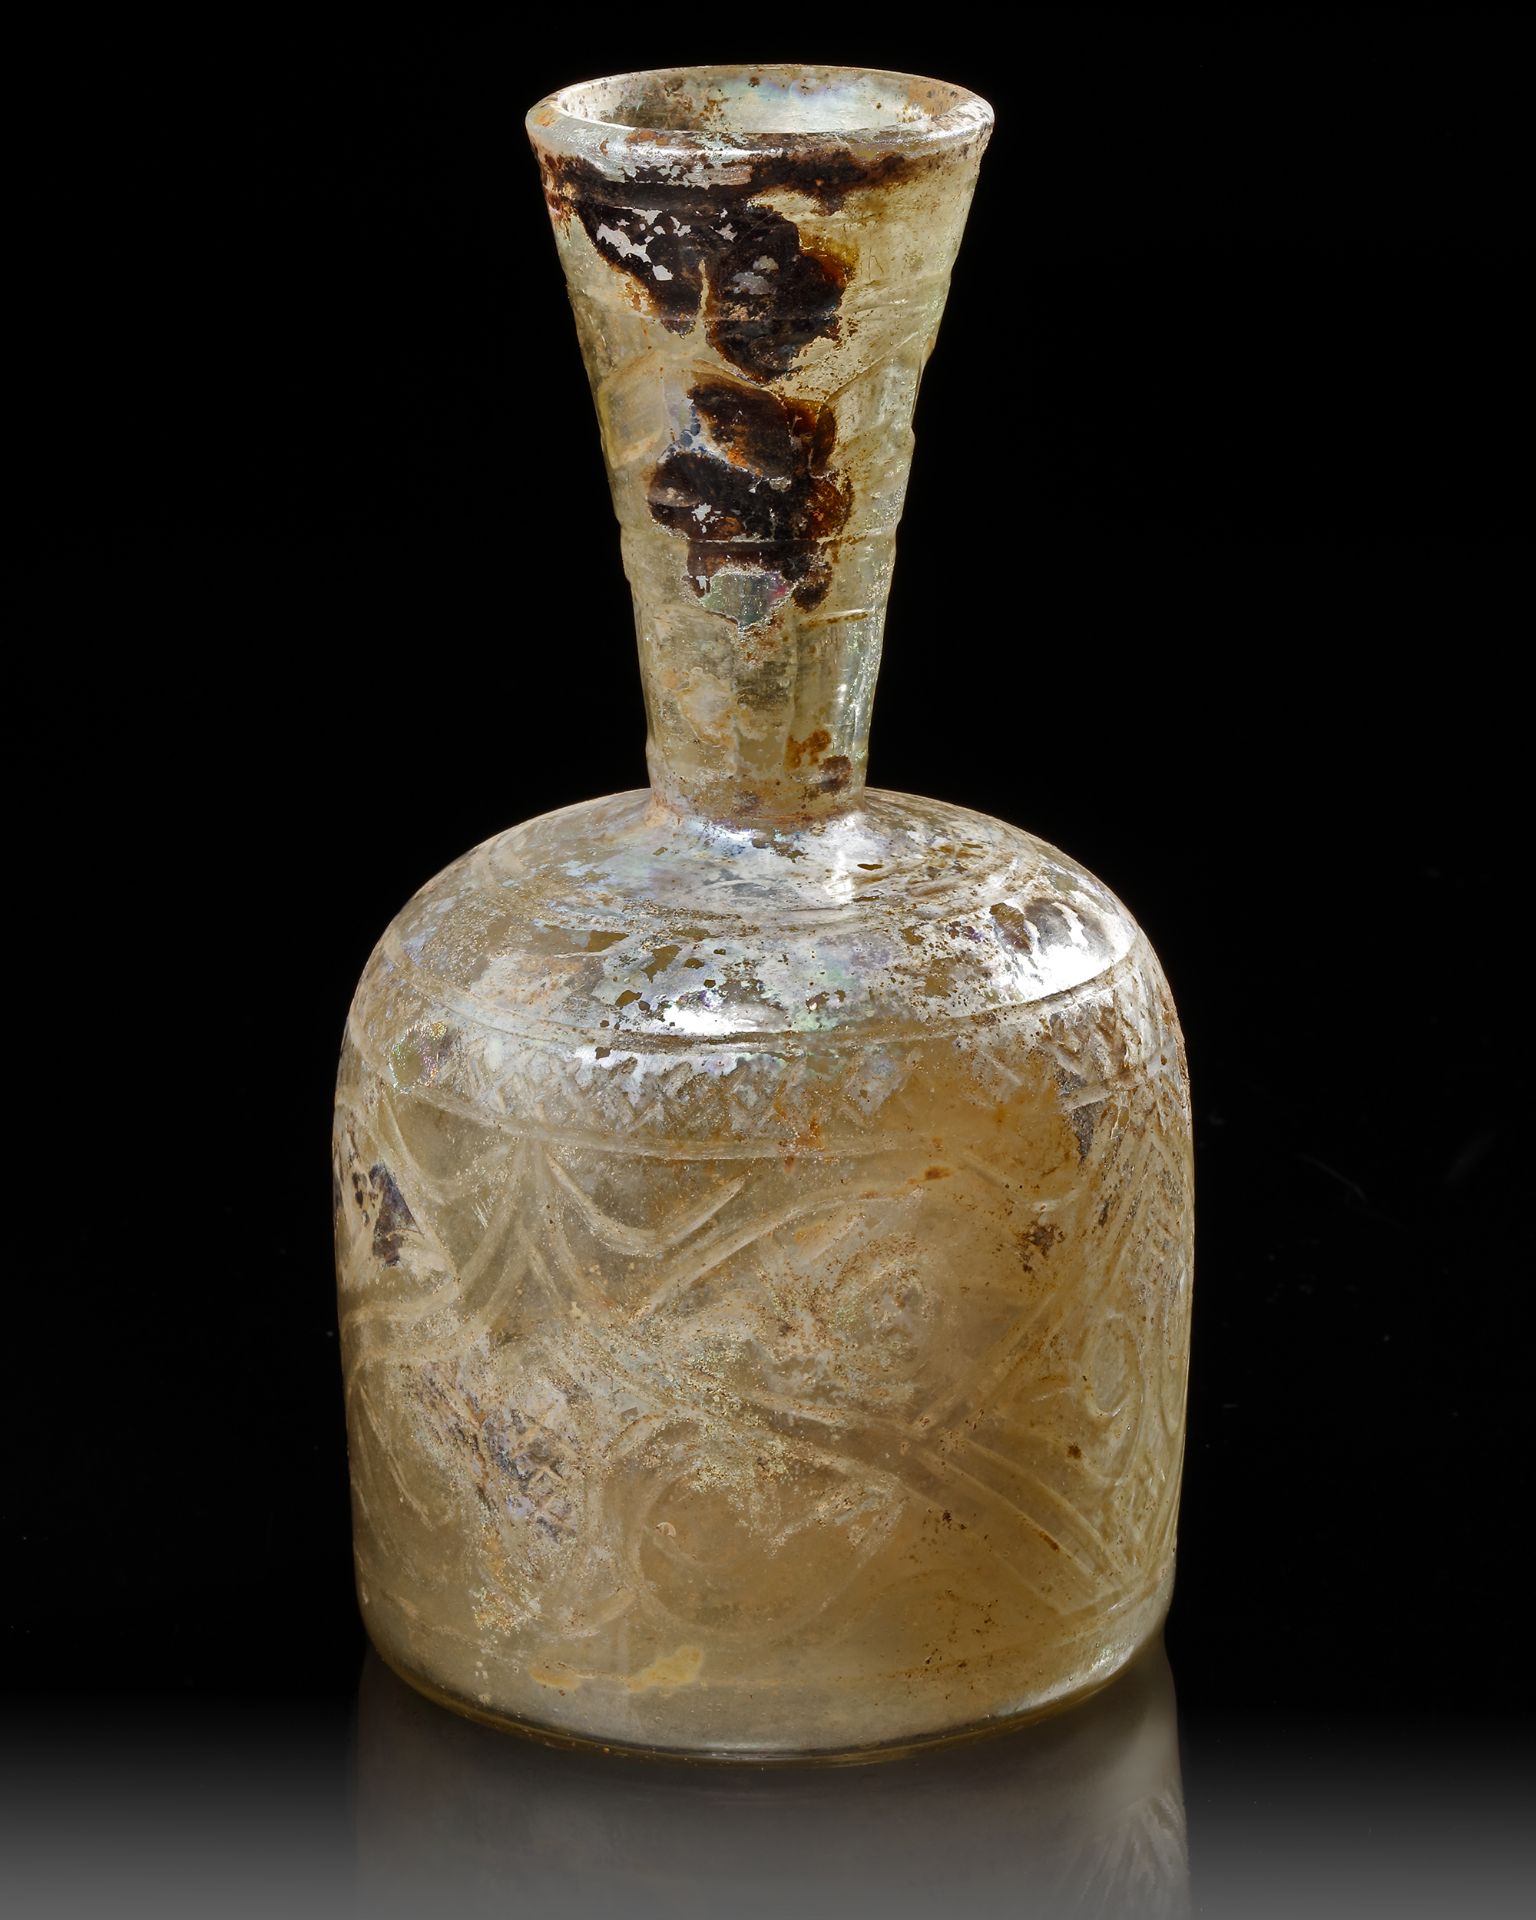 A LARGE WHEEL-CUT CLEAR GLASS FLASK, PERSIA, 9TH-10TH CENTURY - Image 4 of 7